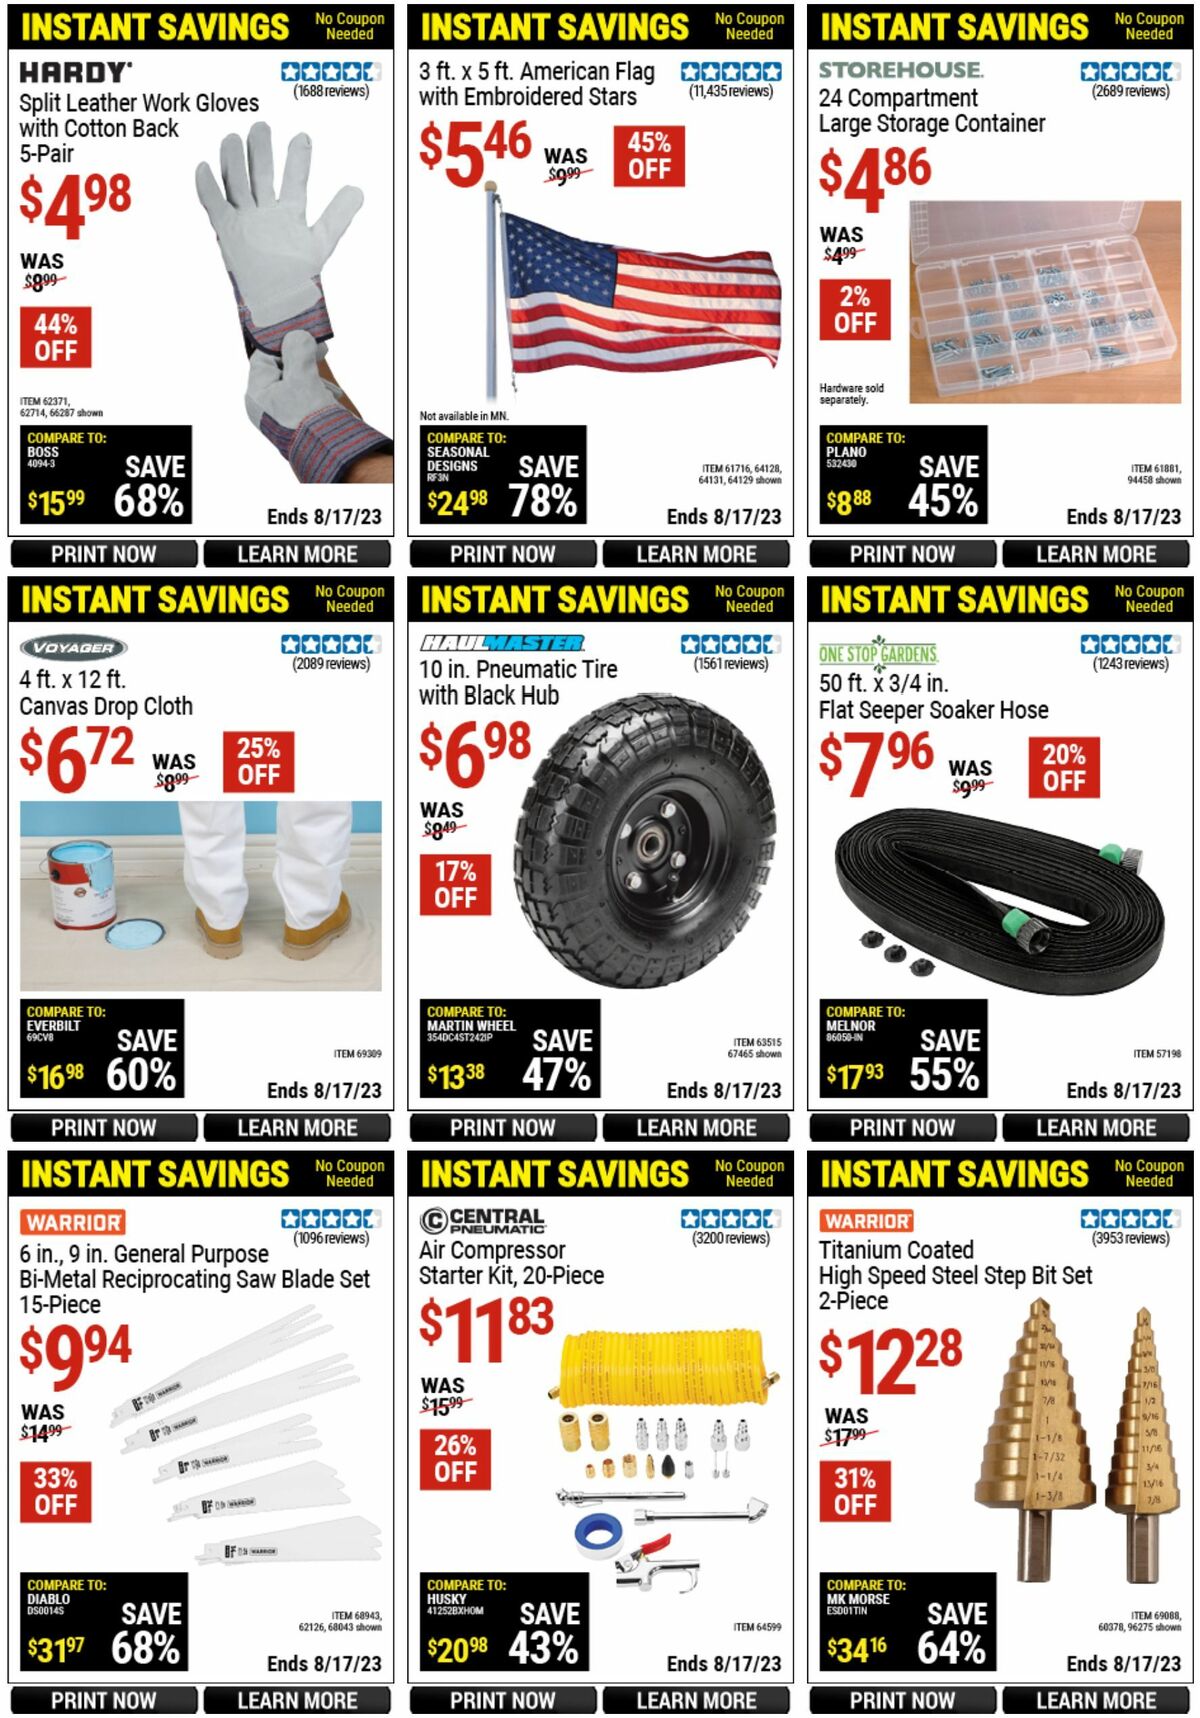 Harbor Freight Tools Instant Savings Weekly Ad from July 14